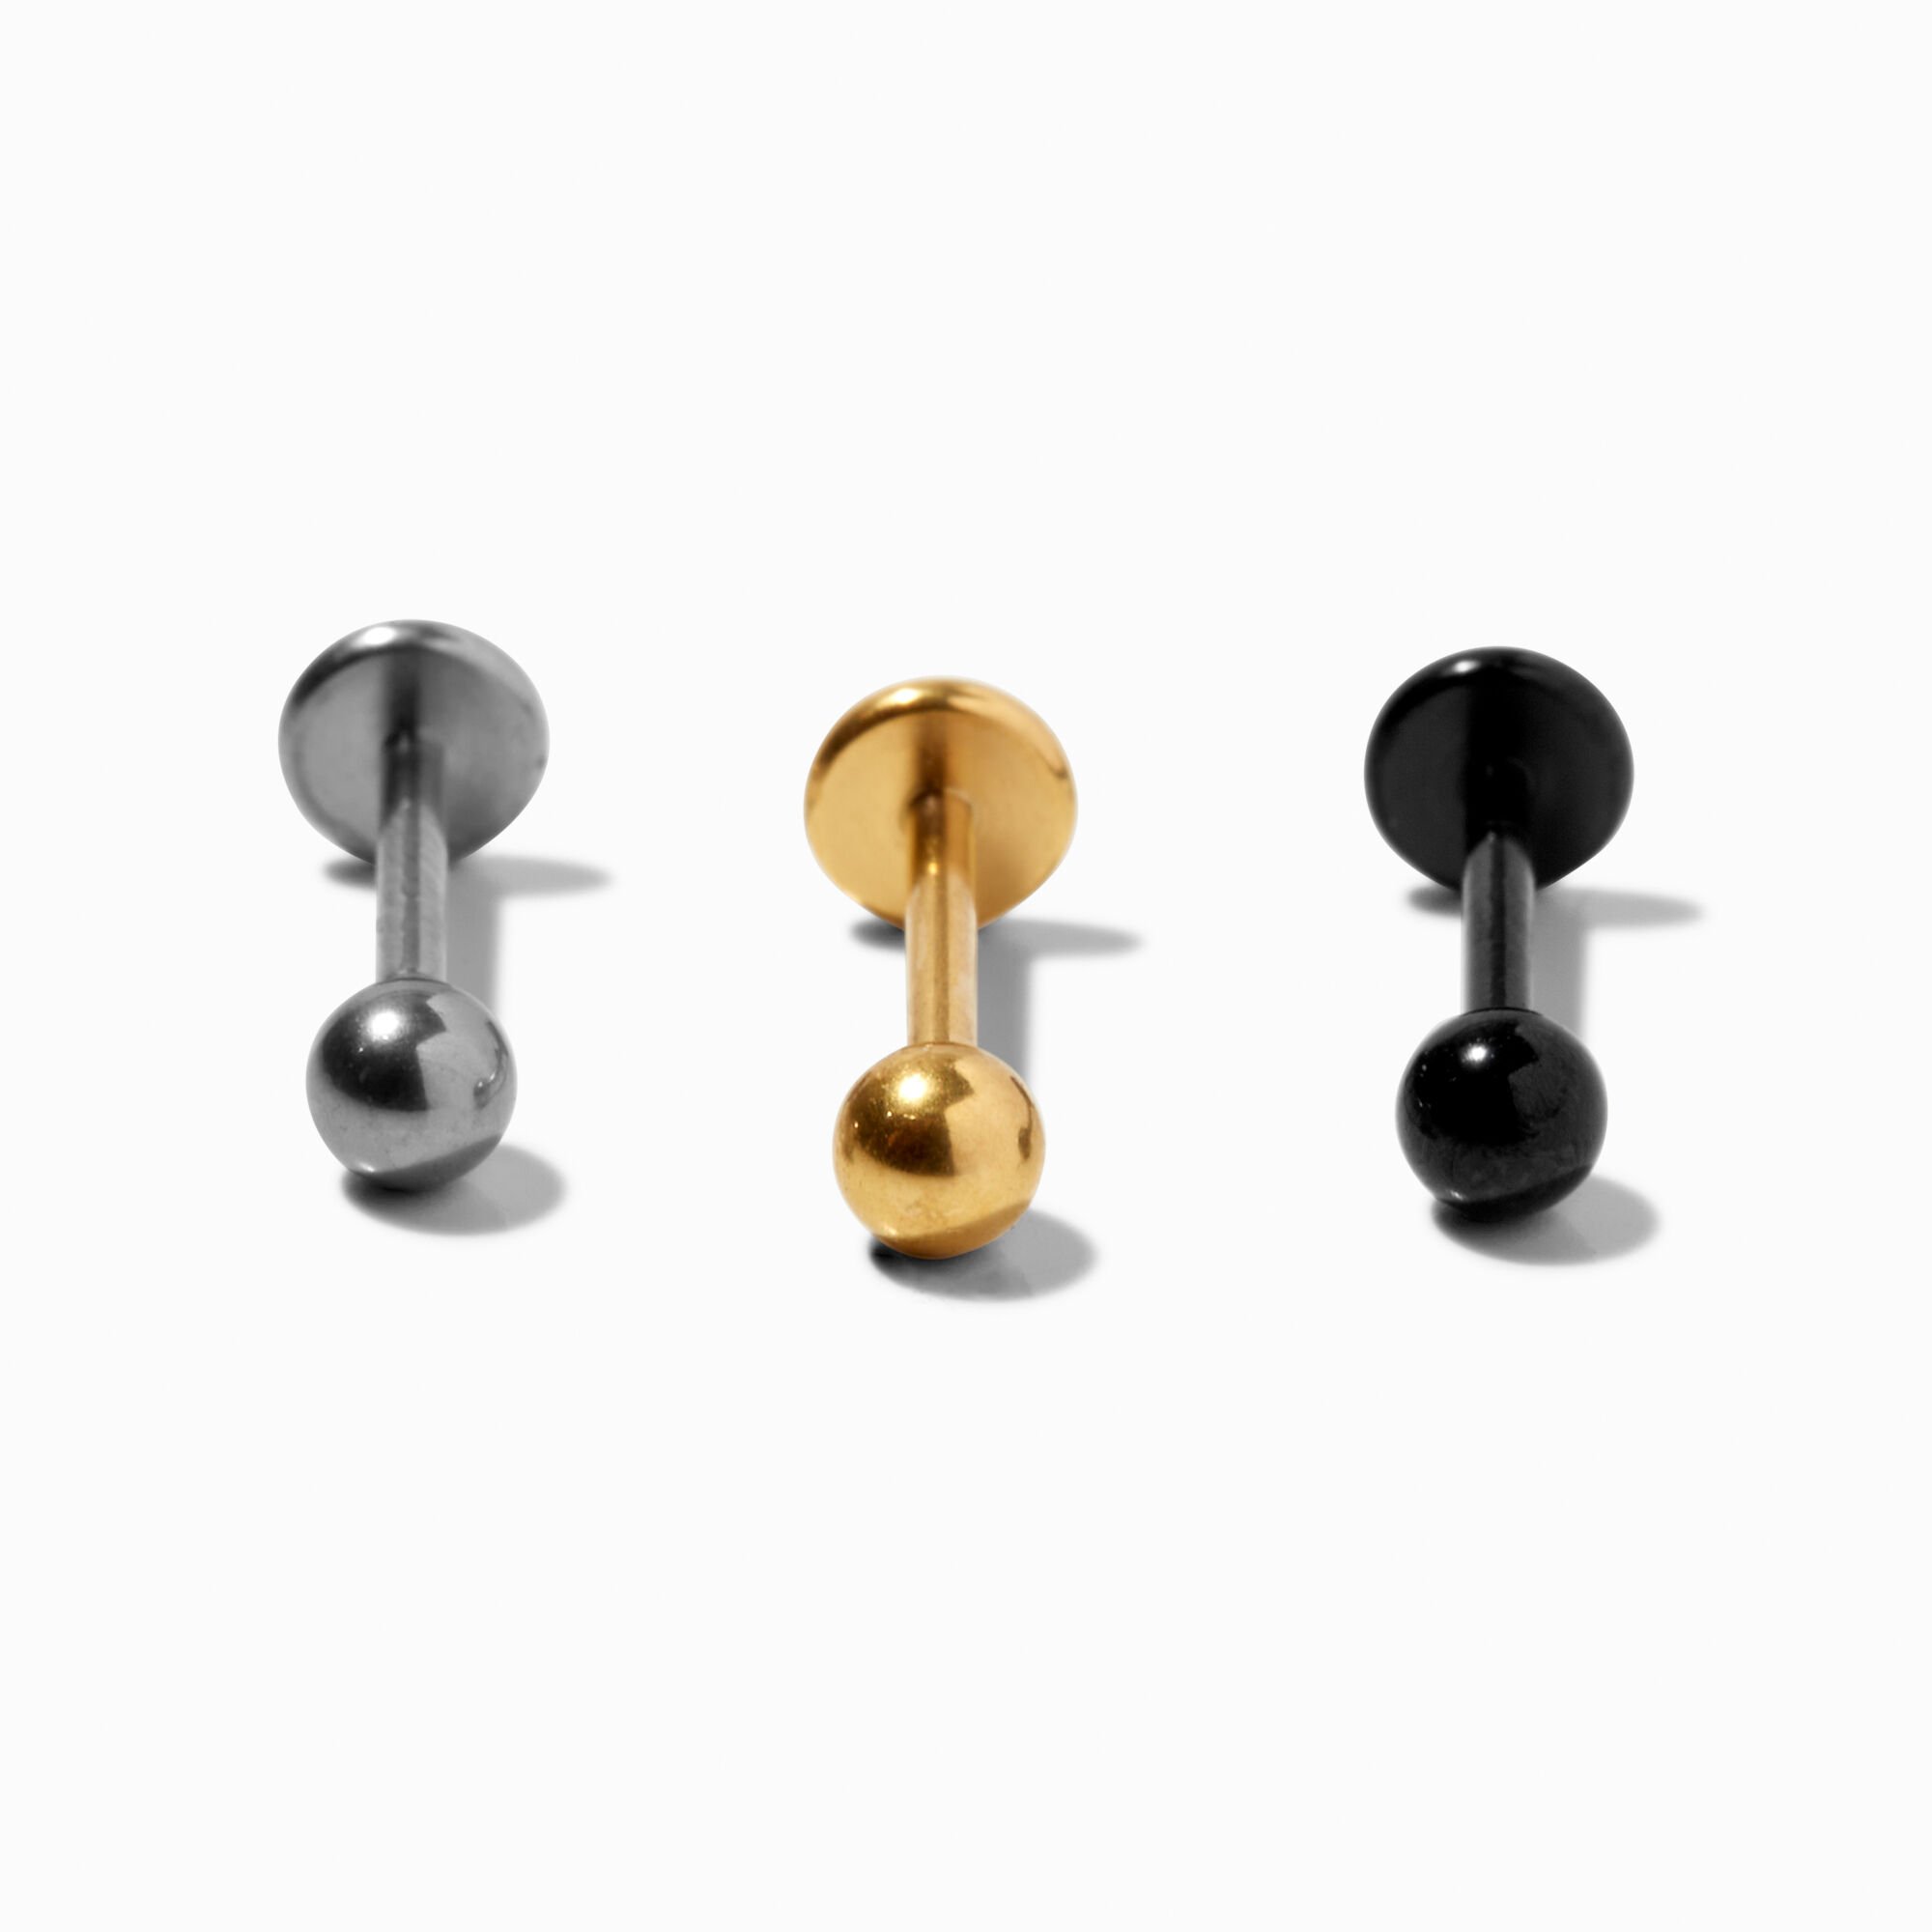 View Claires Mixed Metals Titanium 18G Flat Back Tragus Stud Earrings 3 Pack Gold information